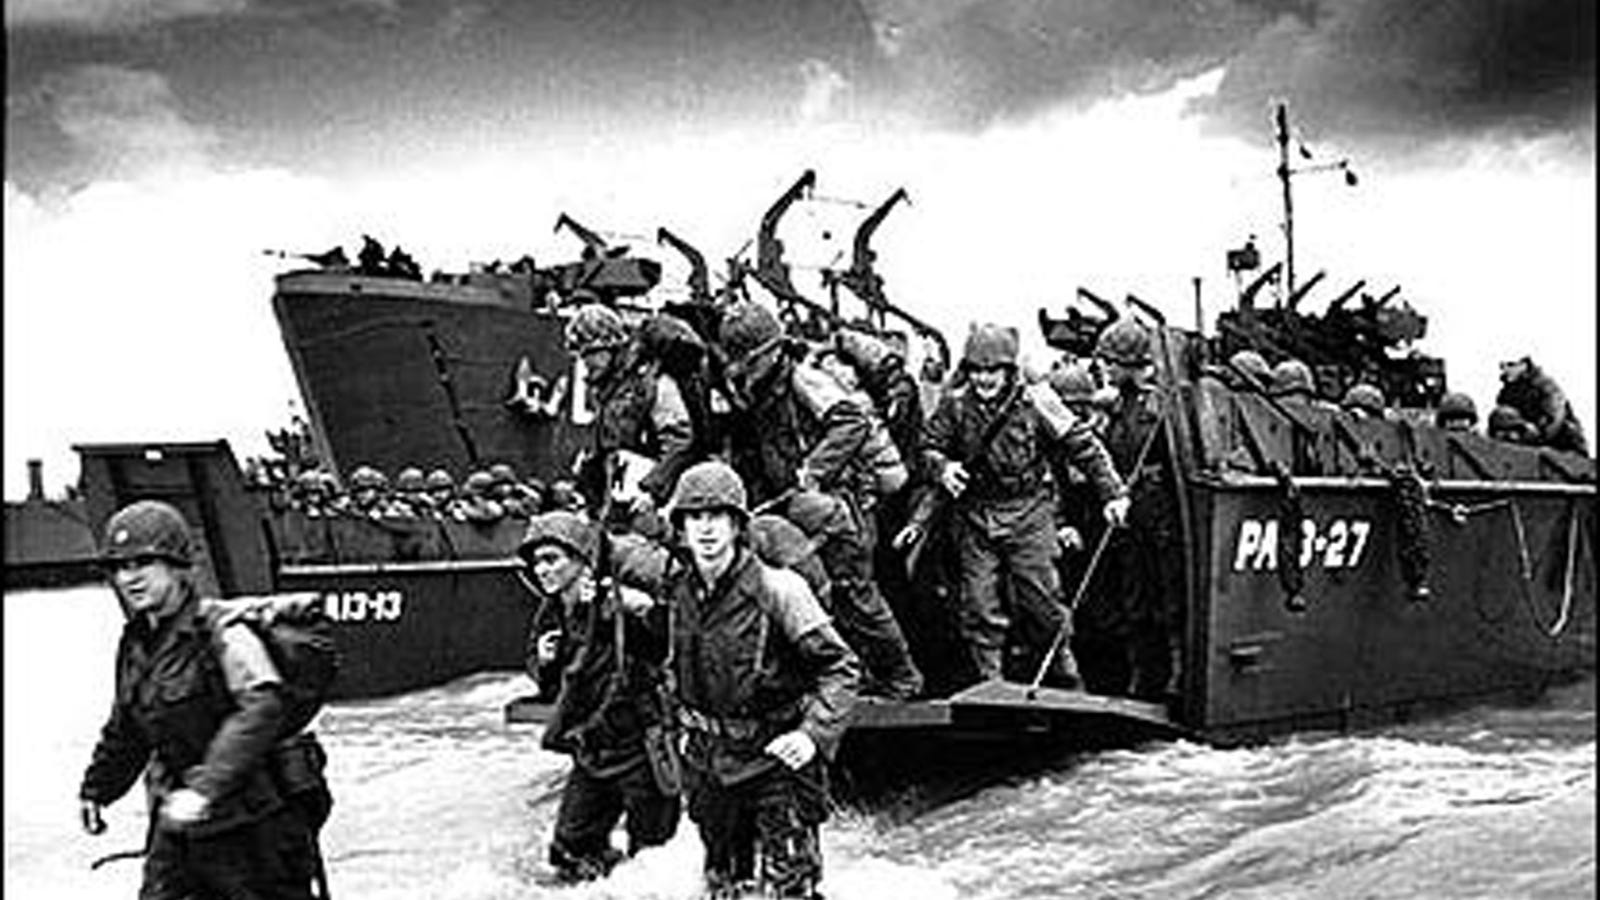 75th DDay anniversary a reminder we can obstacles